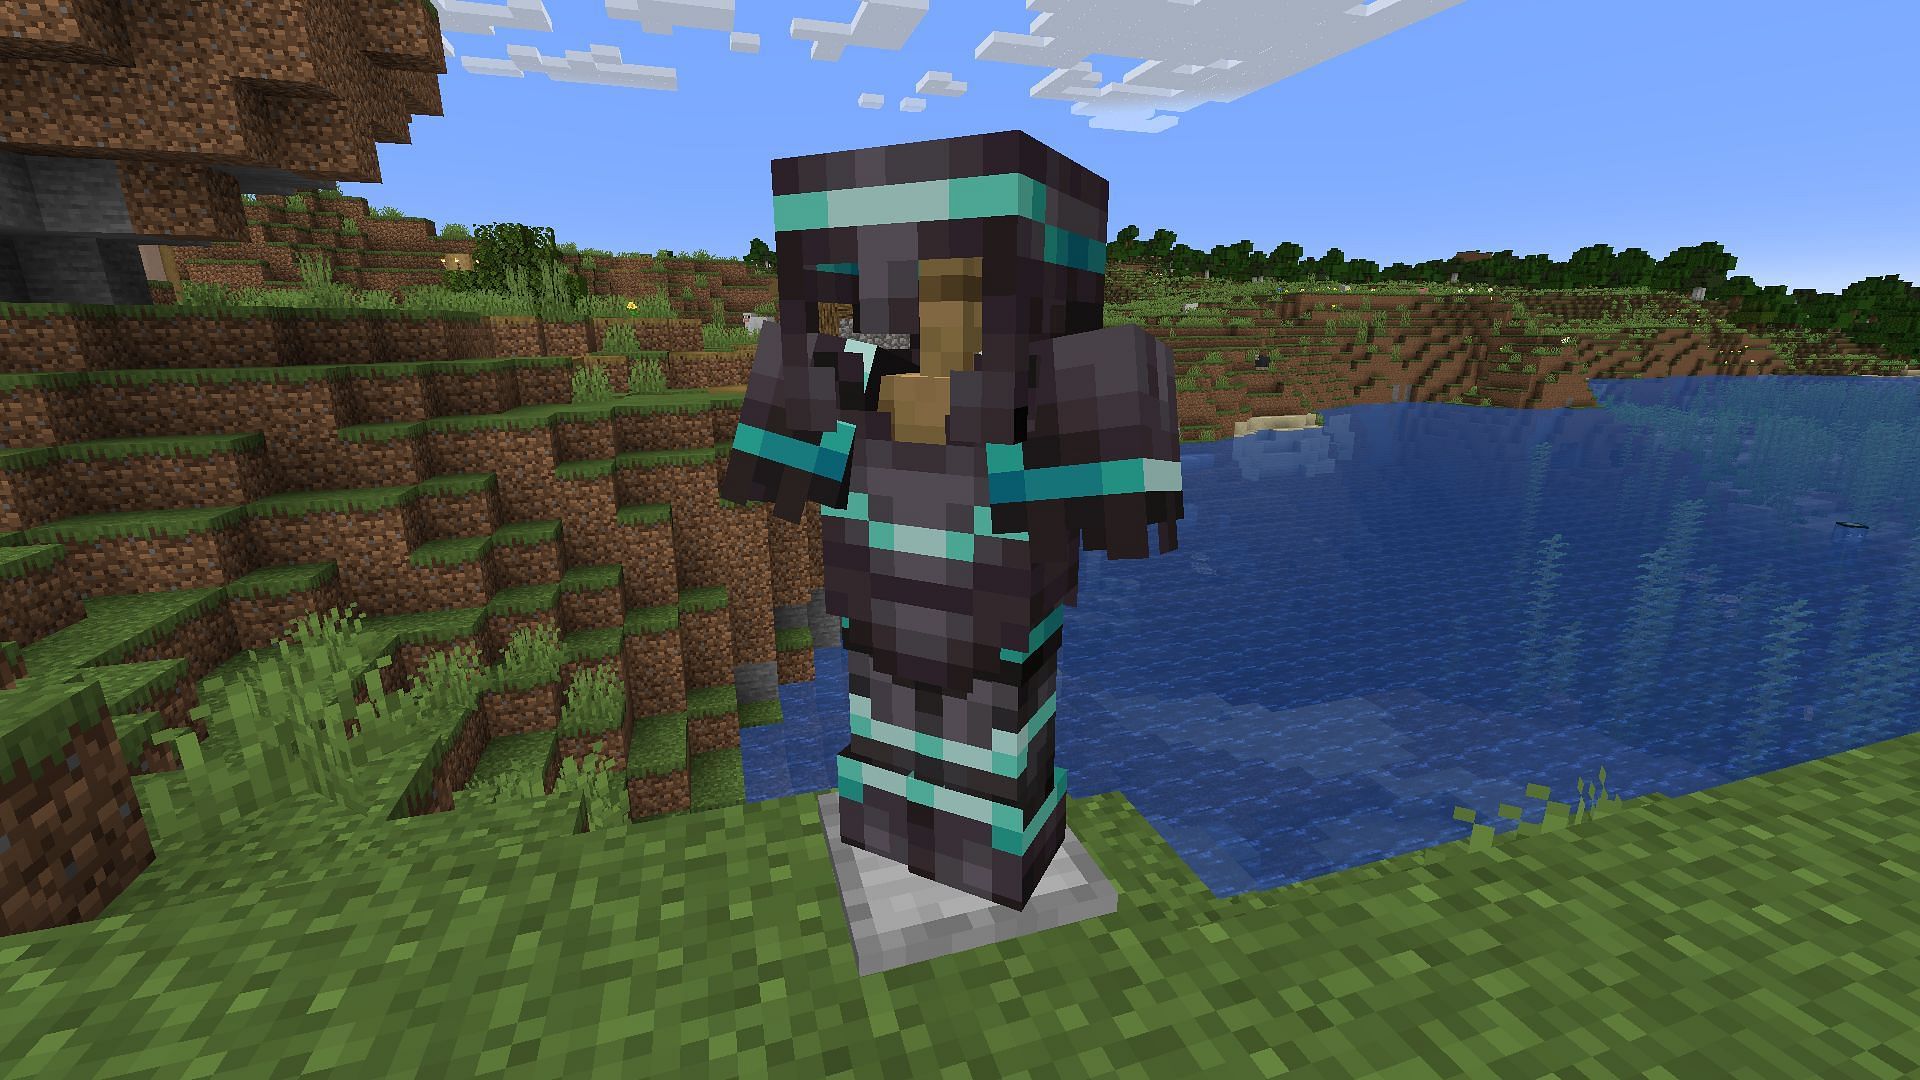 The Host armor trim in Minecraft has a simple but eye-catching appeal (Image via Mojang)